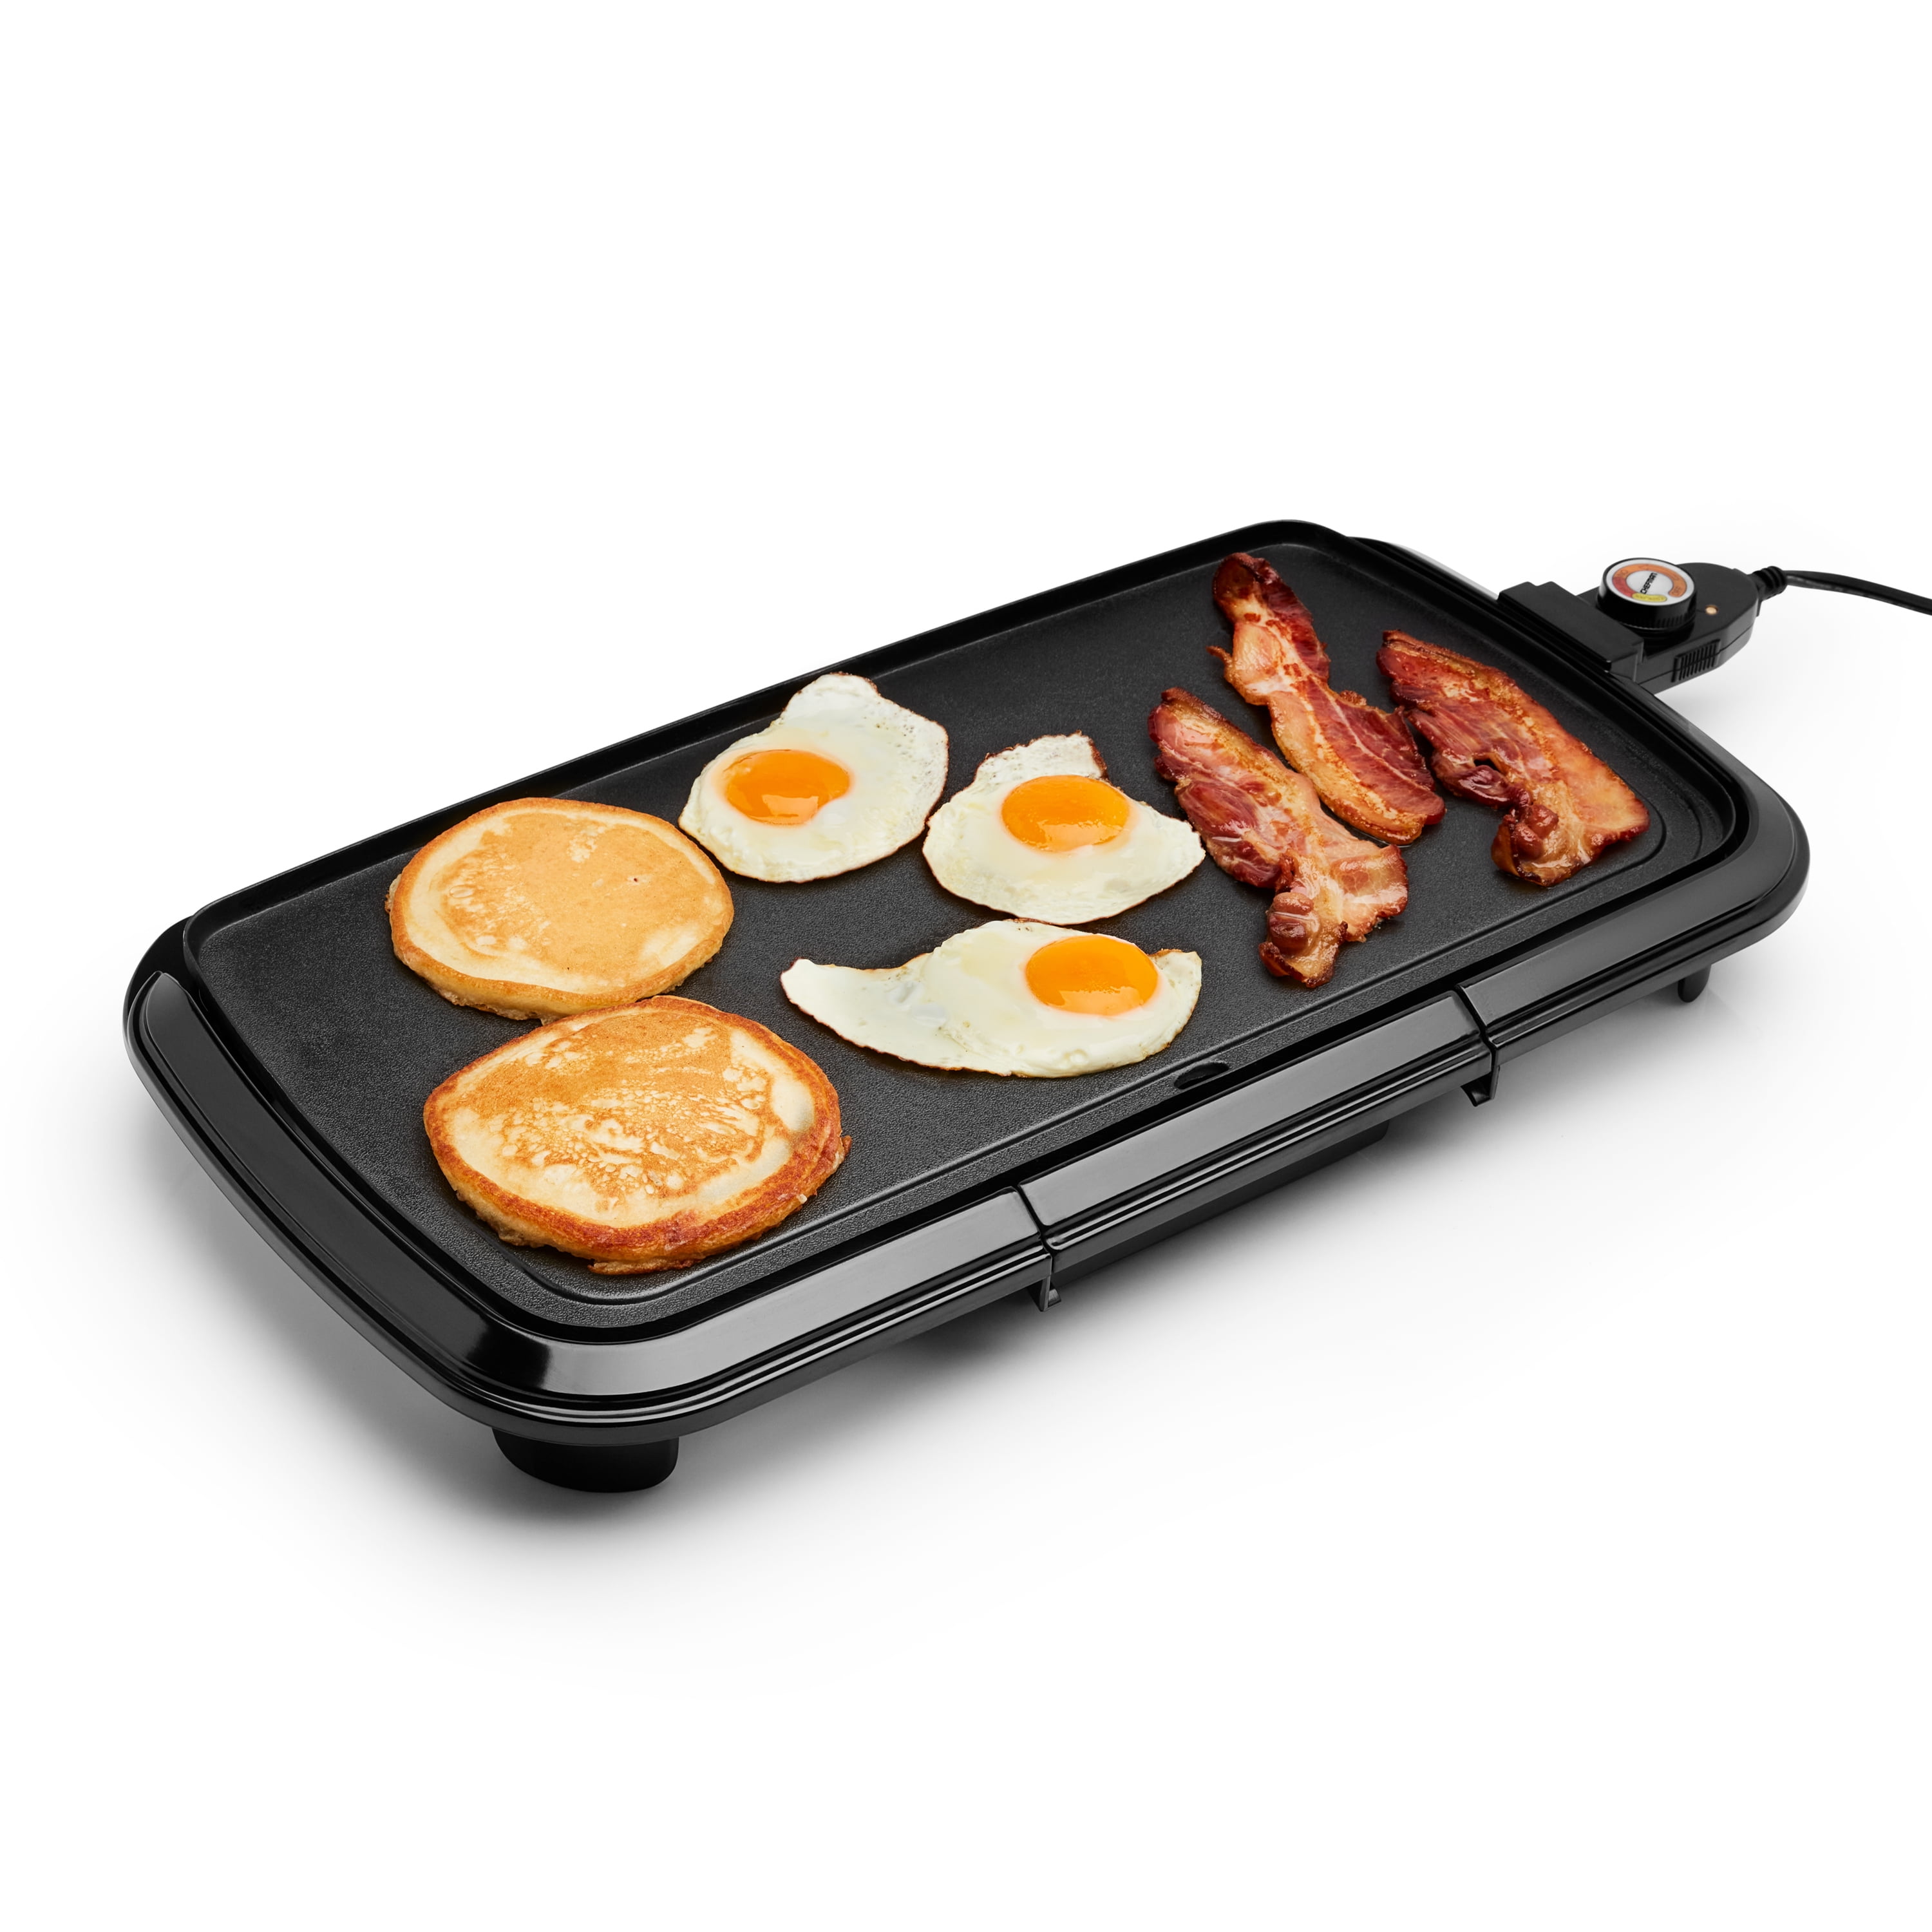 FREE Shipping* Chefman Electric Smokeless Indoor Grill with Non-Stick  Coating